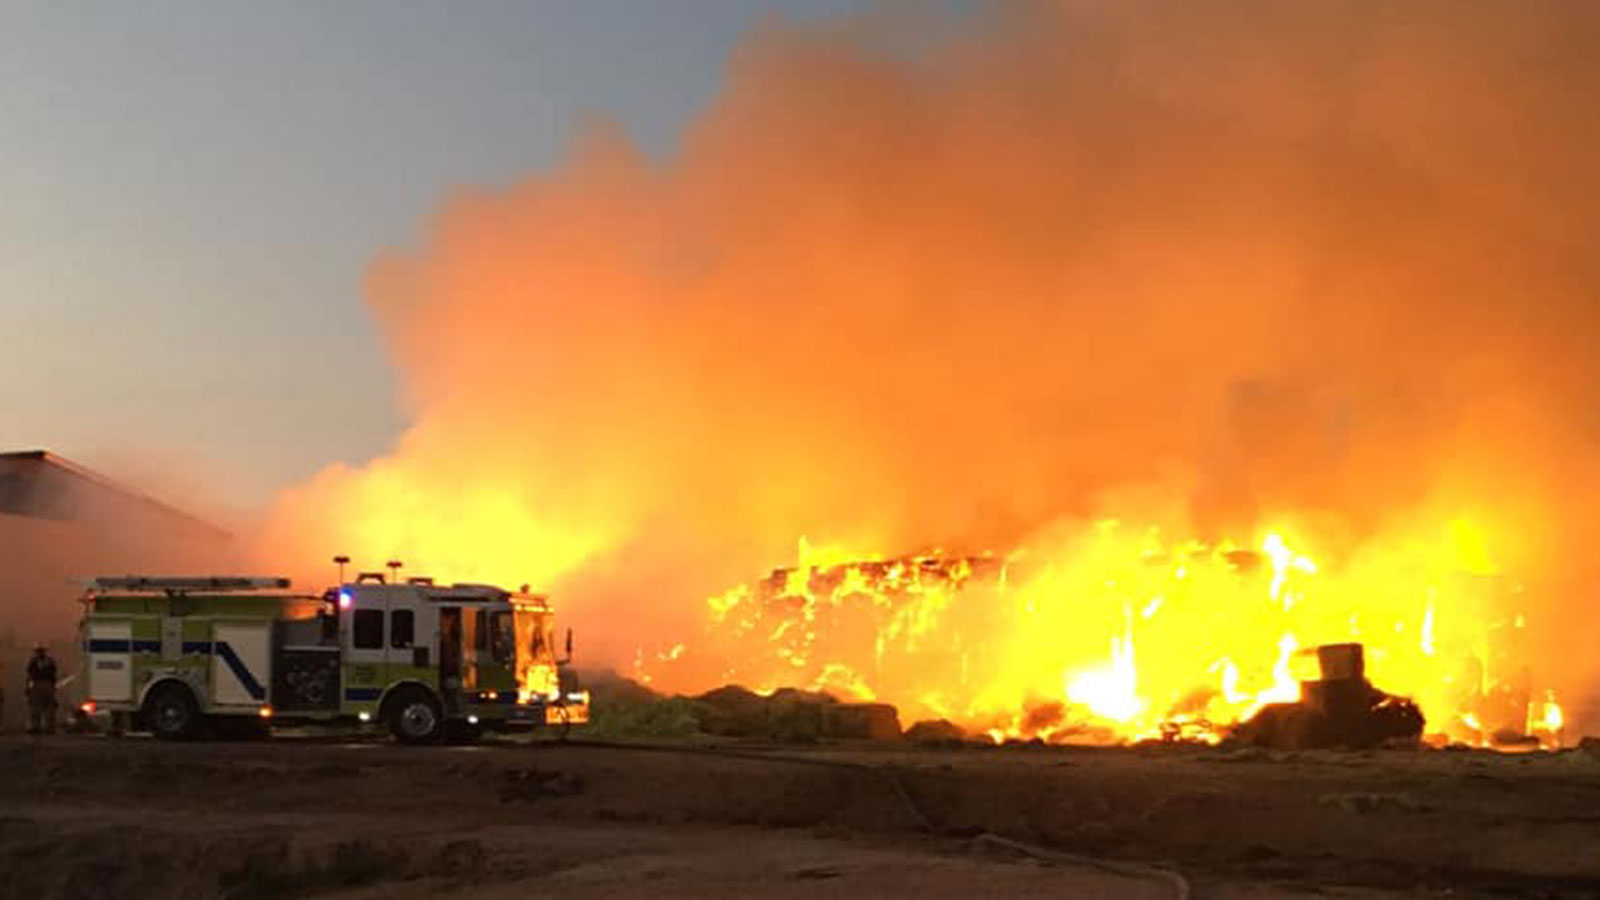 Tuesday morning hay bale fire sends smoke into air across East Valley